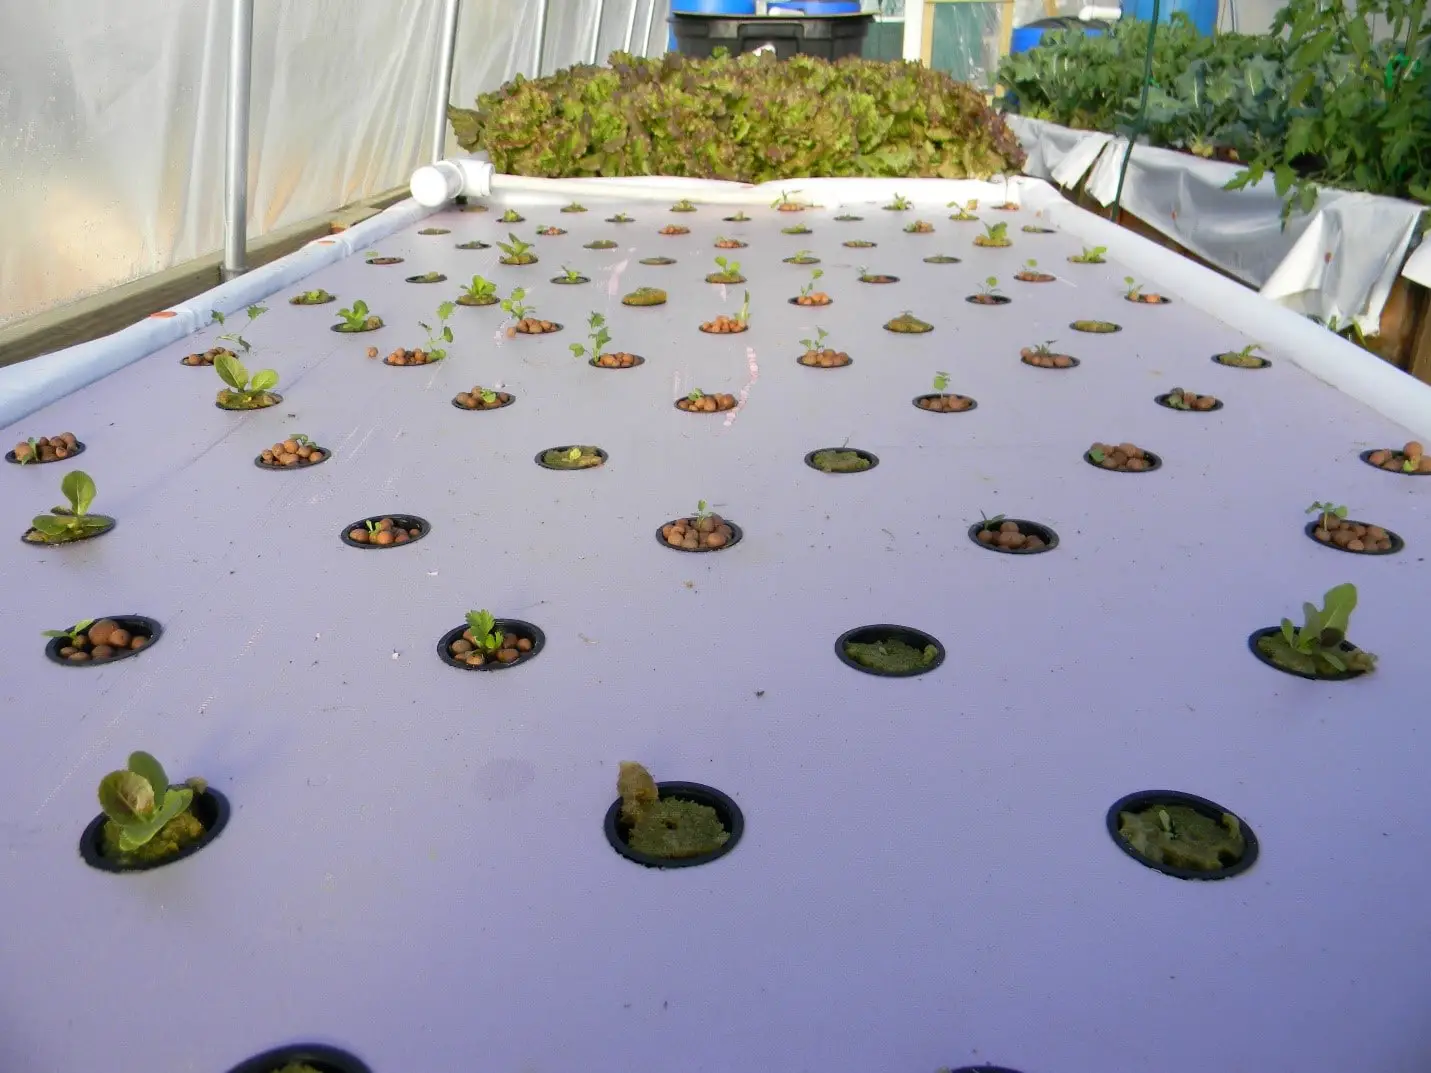 How Deep Should an Aquaponics grow bed Be? - Green Garden Tribe